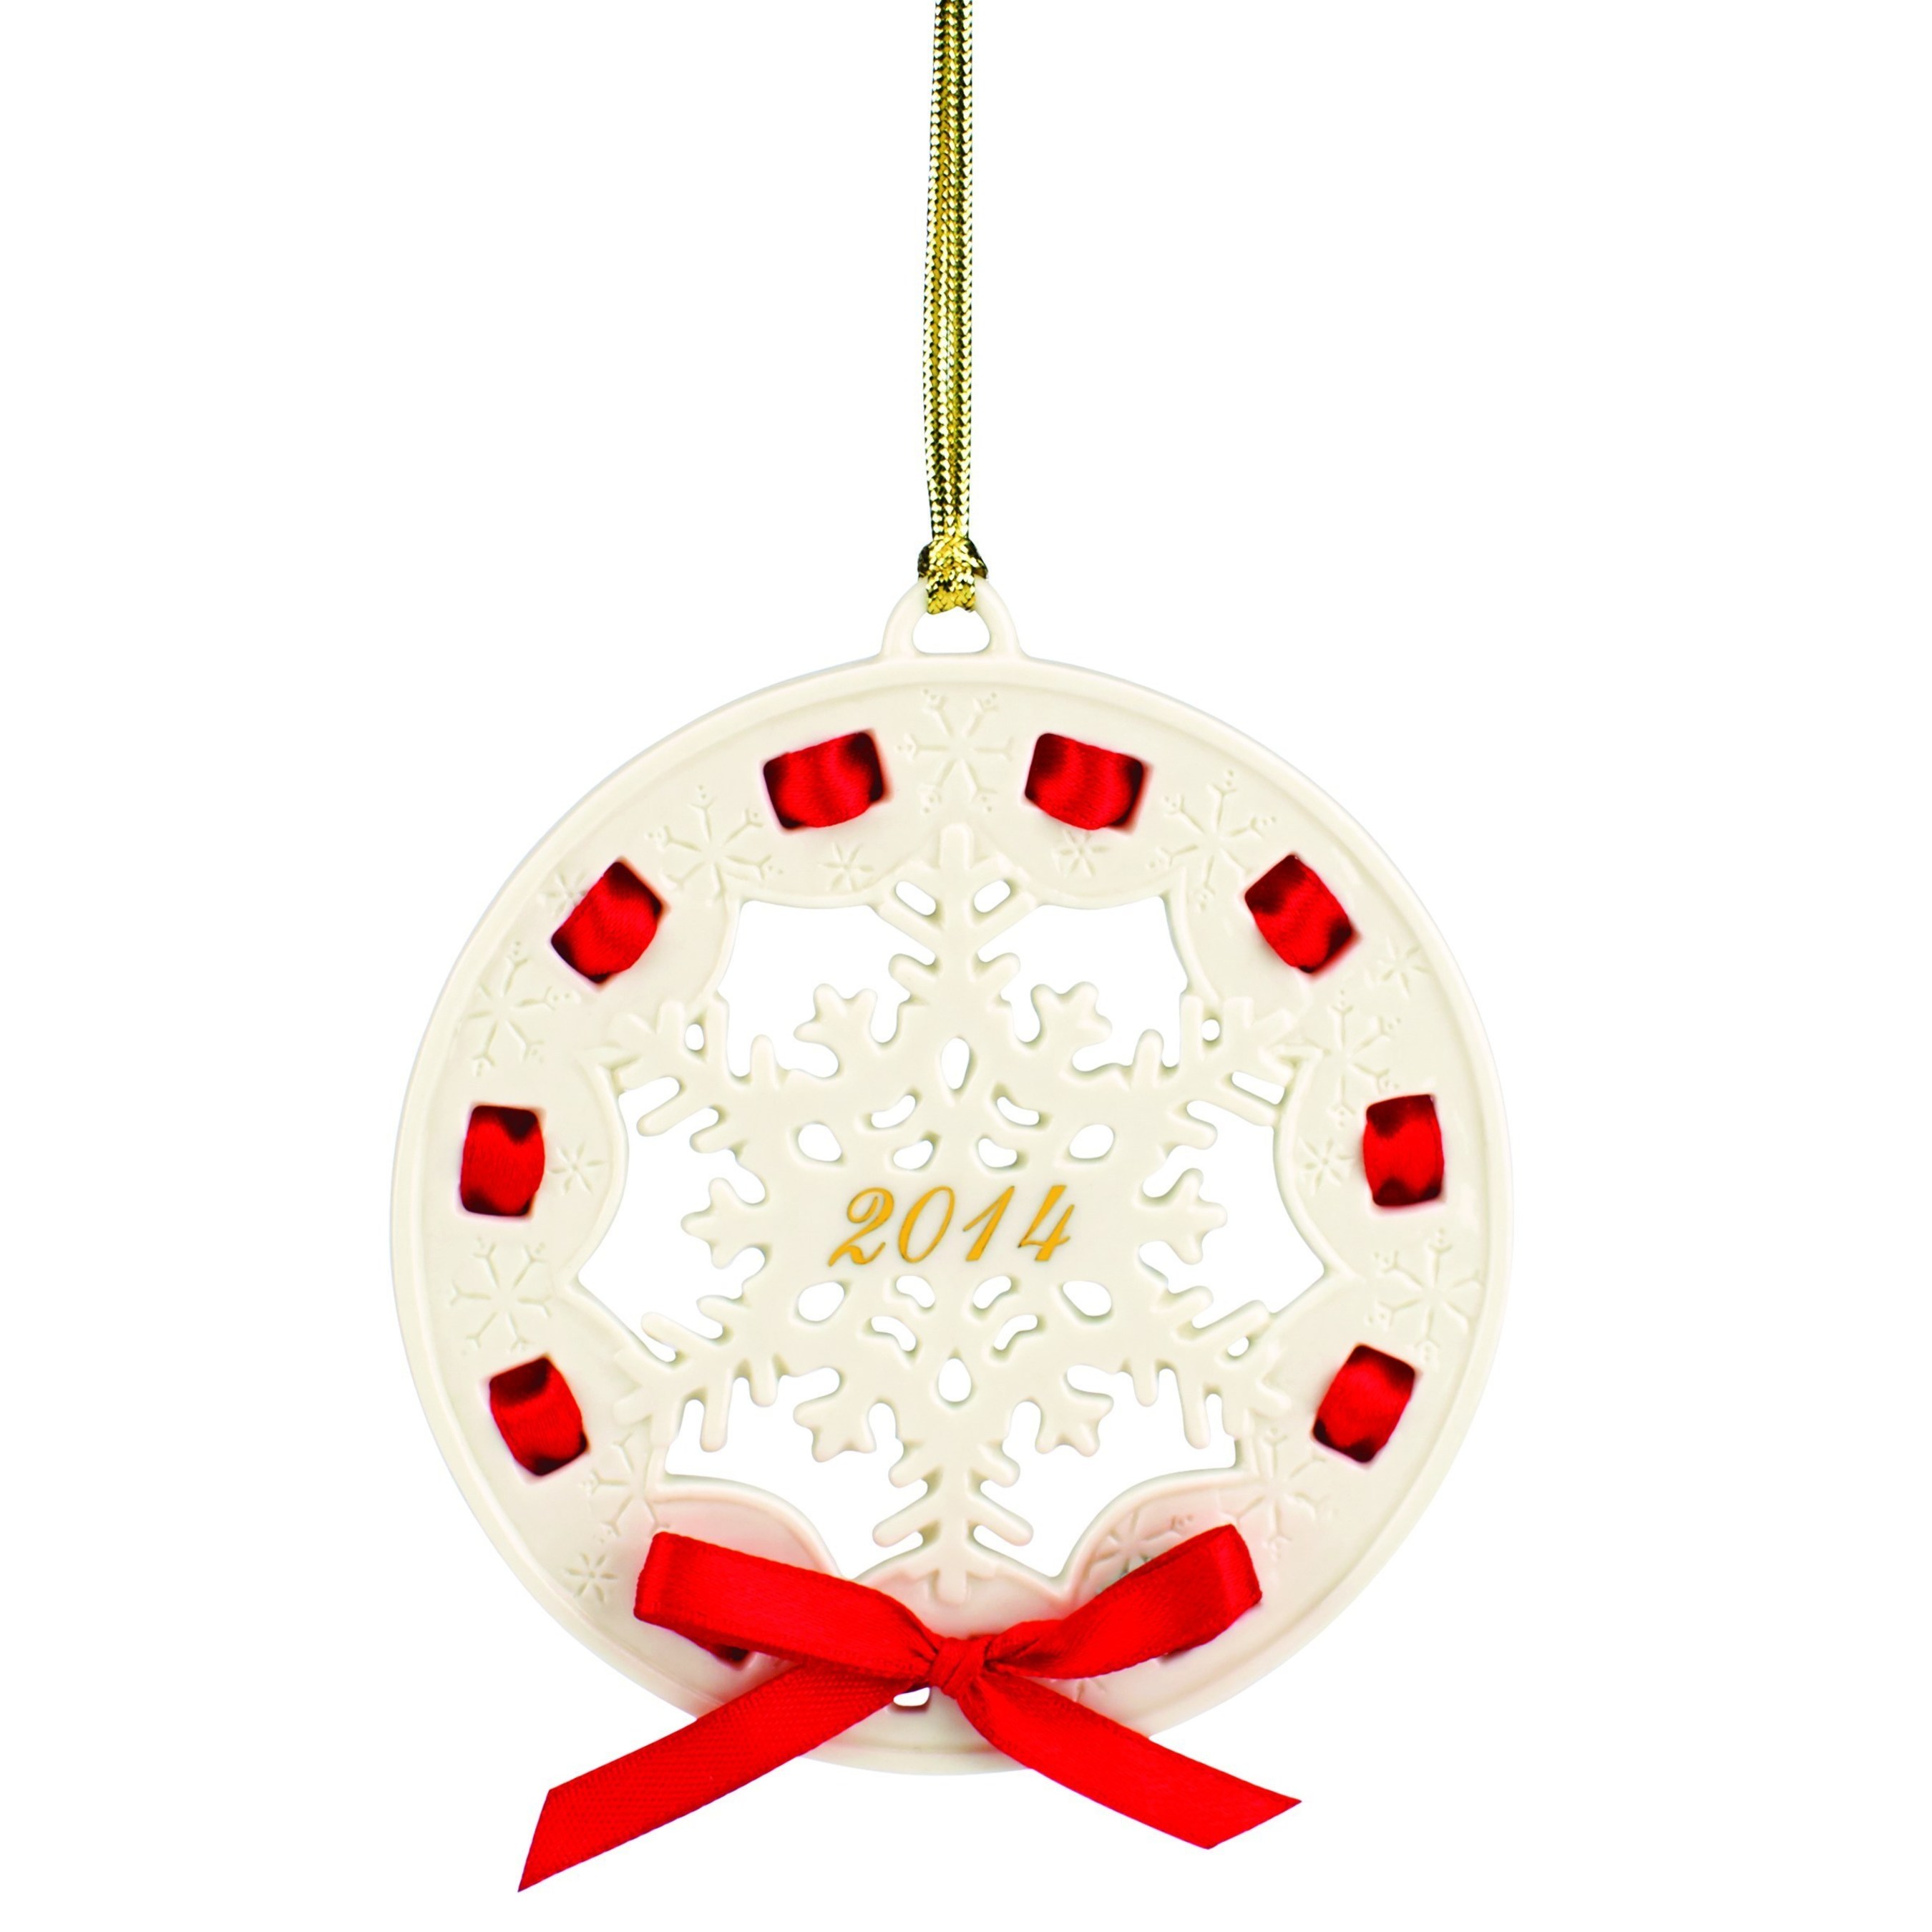 Lenox 2014 Christmas Wrappings Snowflake Ornament - Preserve the beauty of a single snowflake in ivory porcelain. Features a red ribbon woven through the edges.